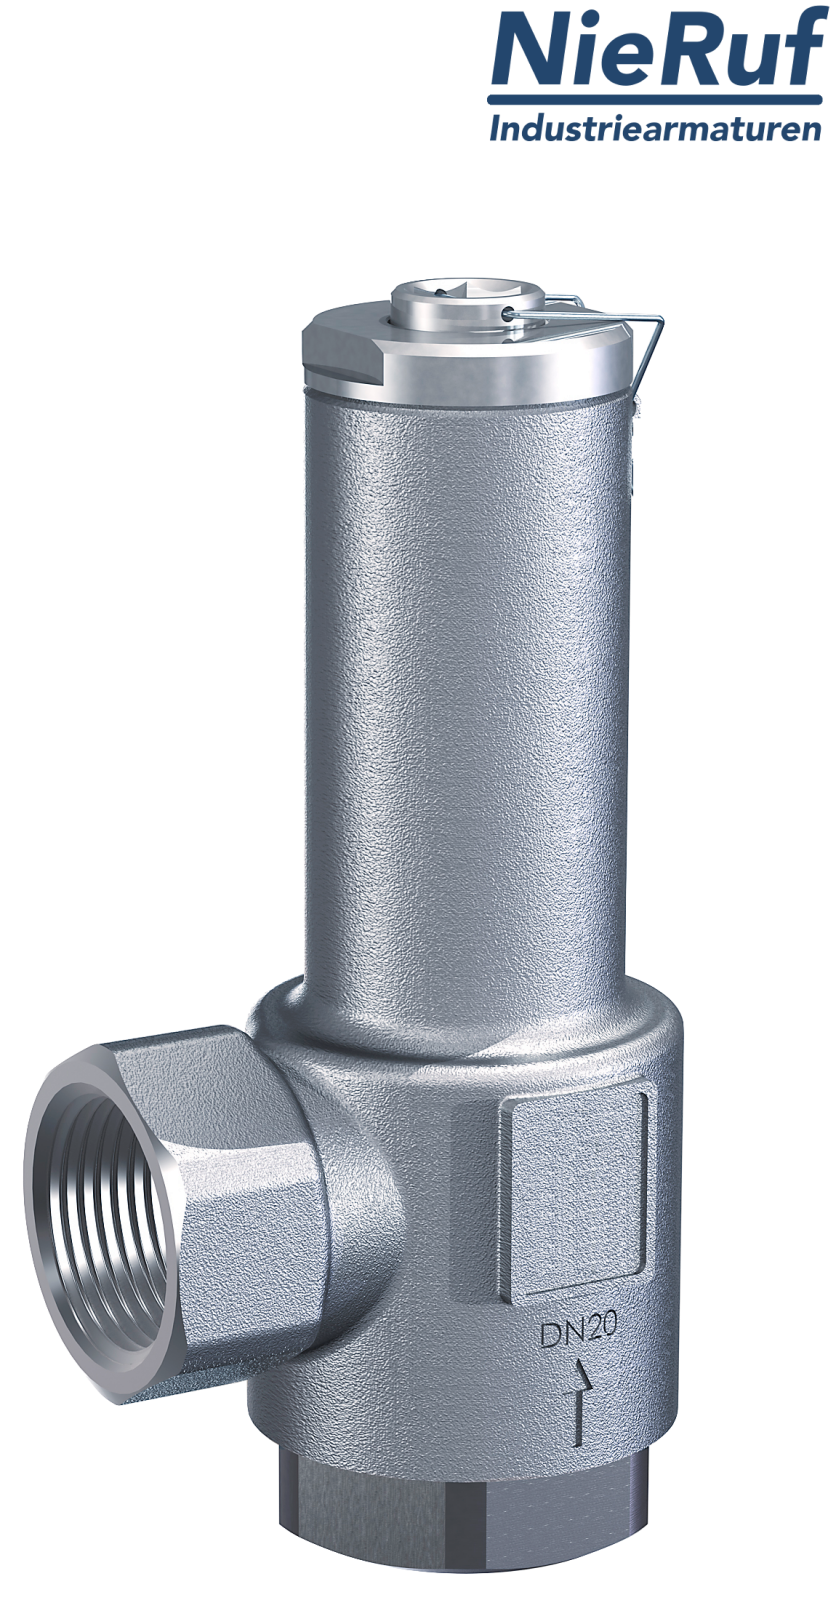 angle-type overflow valve 1 1/2" inch fm UV04 stainless steel AISI 316L 2 - 12 bar